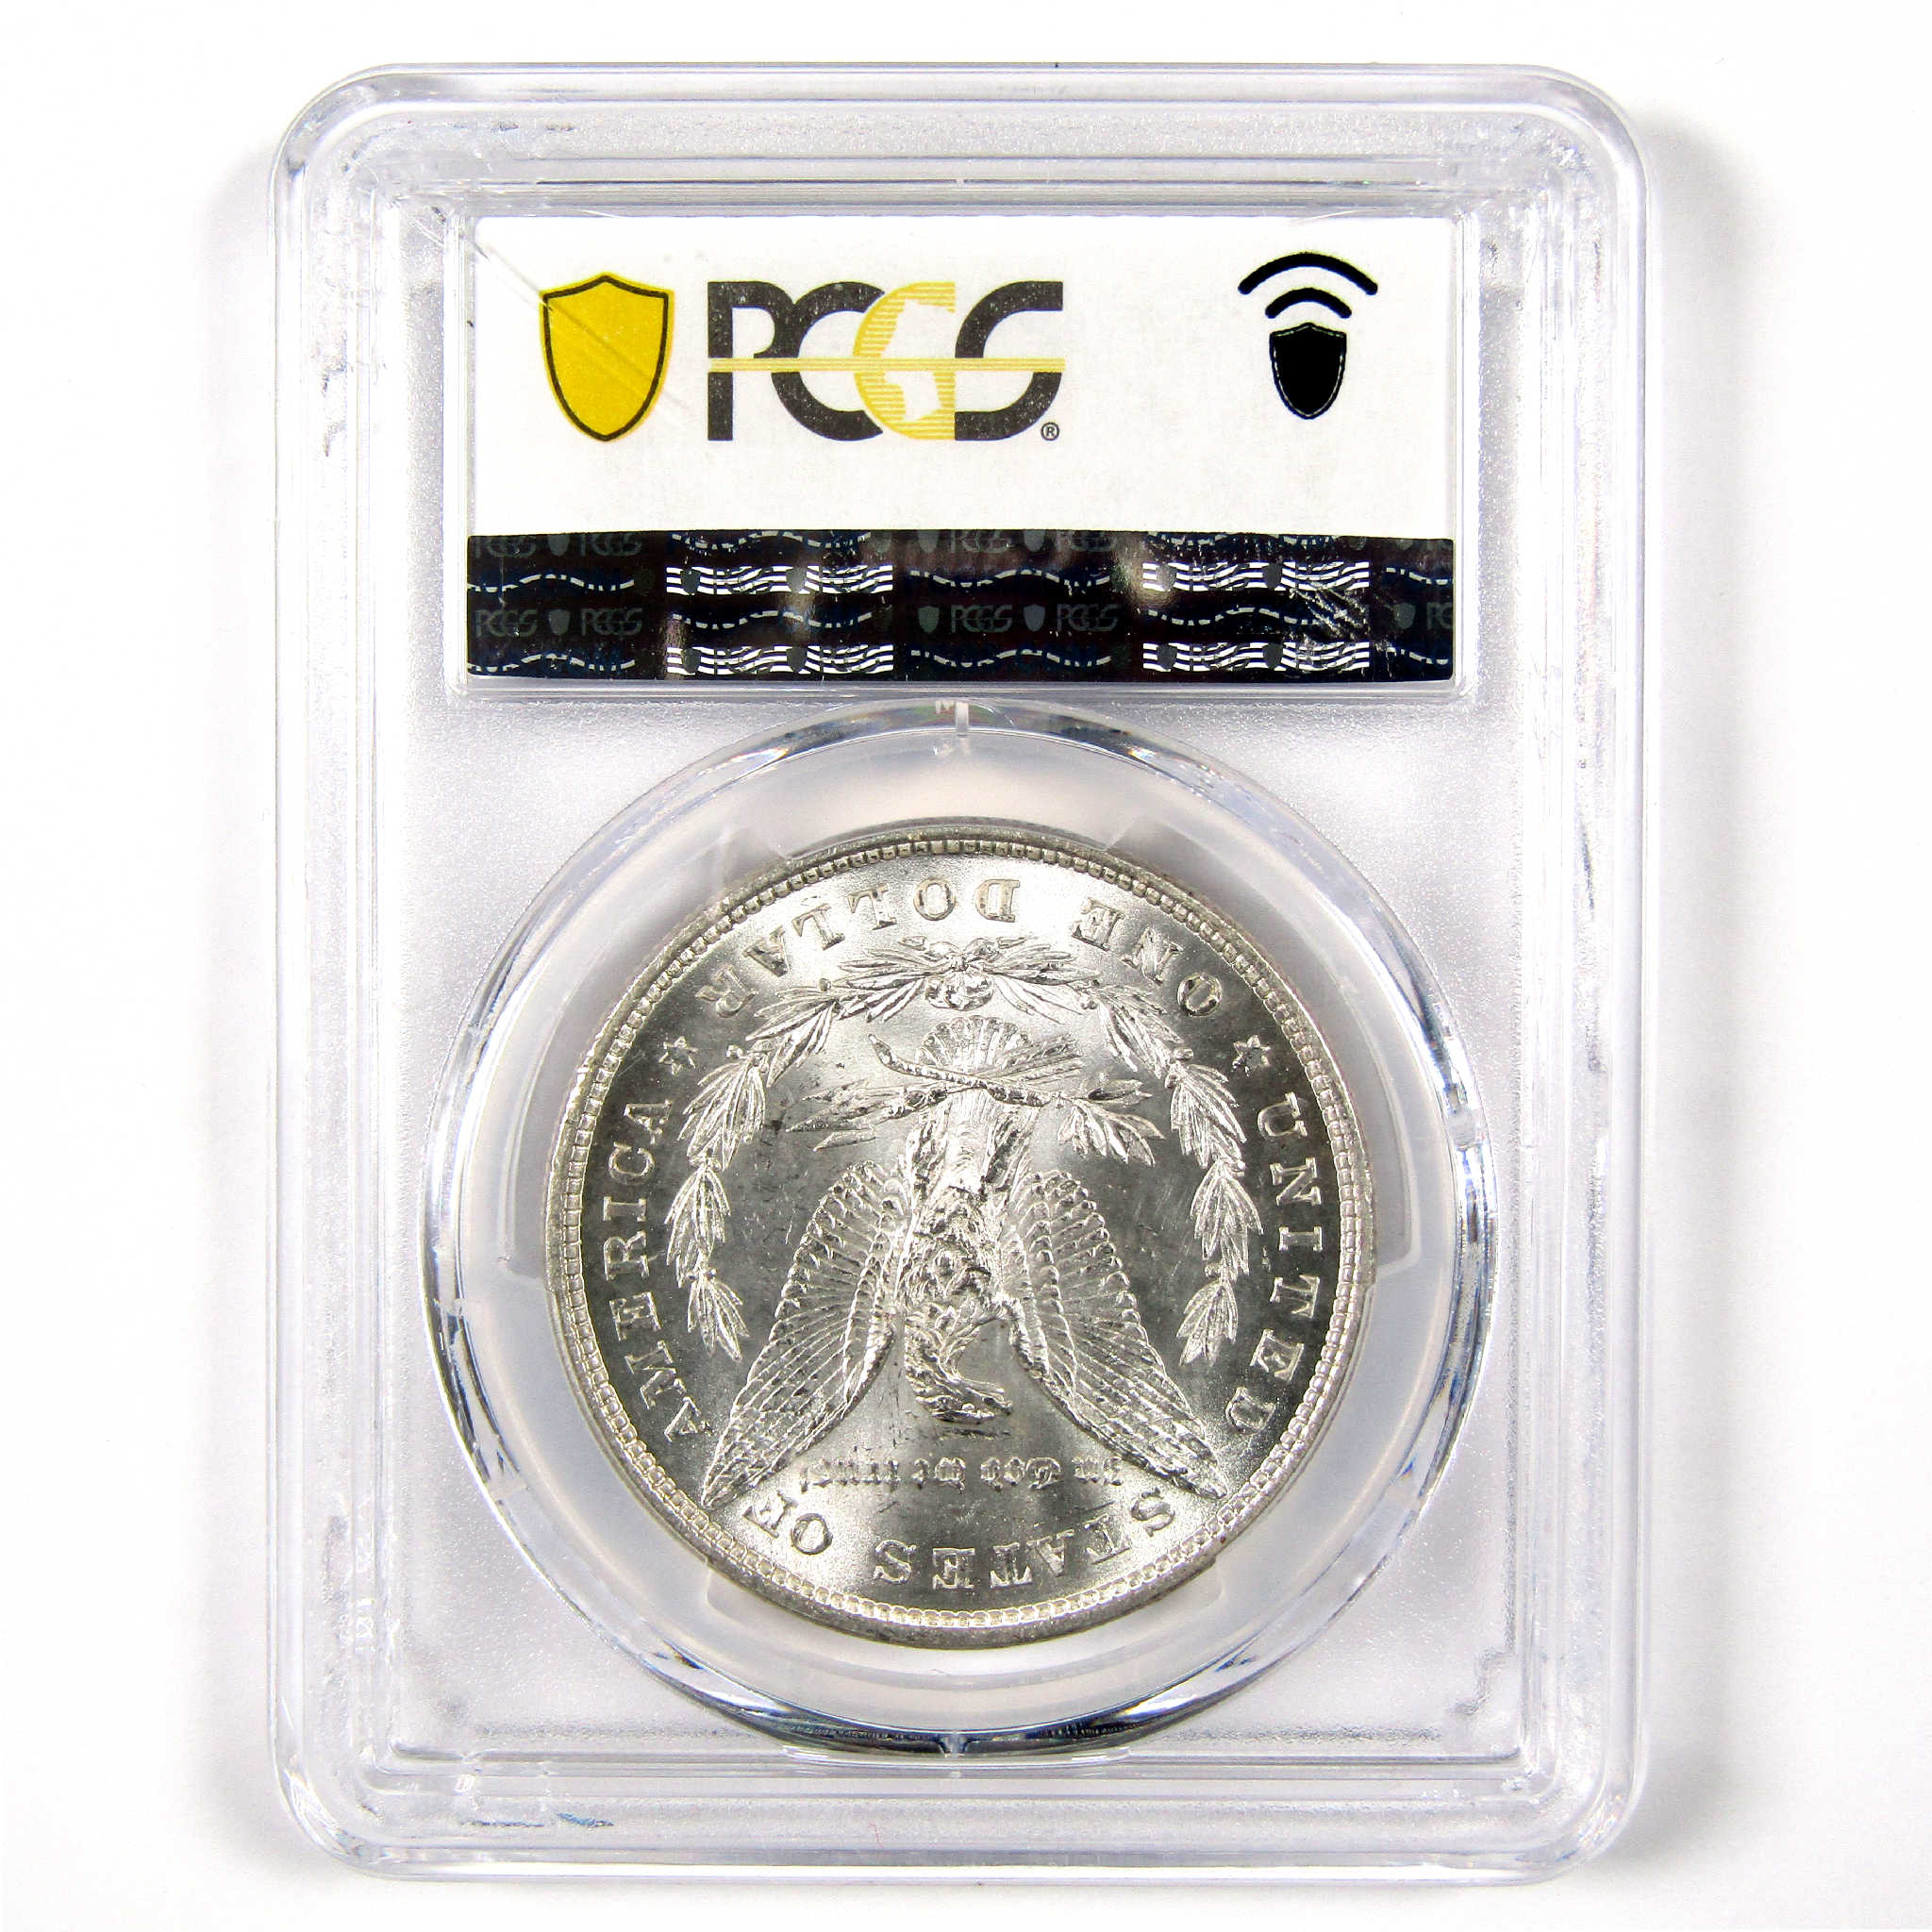 1878 8TF Morgan Dollar MS 63 PCGS Silver $1 Uncirculated SKU:I11333 - Morgan coin - Morgan silver dollar - Morgan silver dollar for sale - Profile Coins &amp; Collectibles